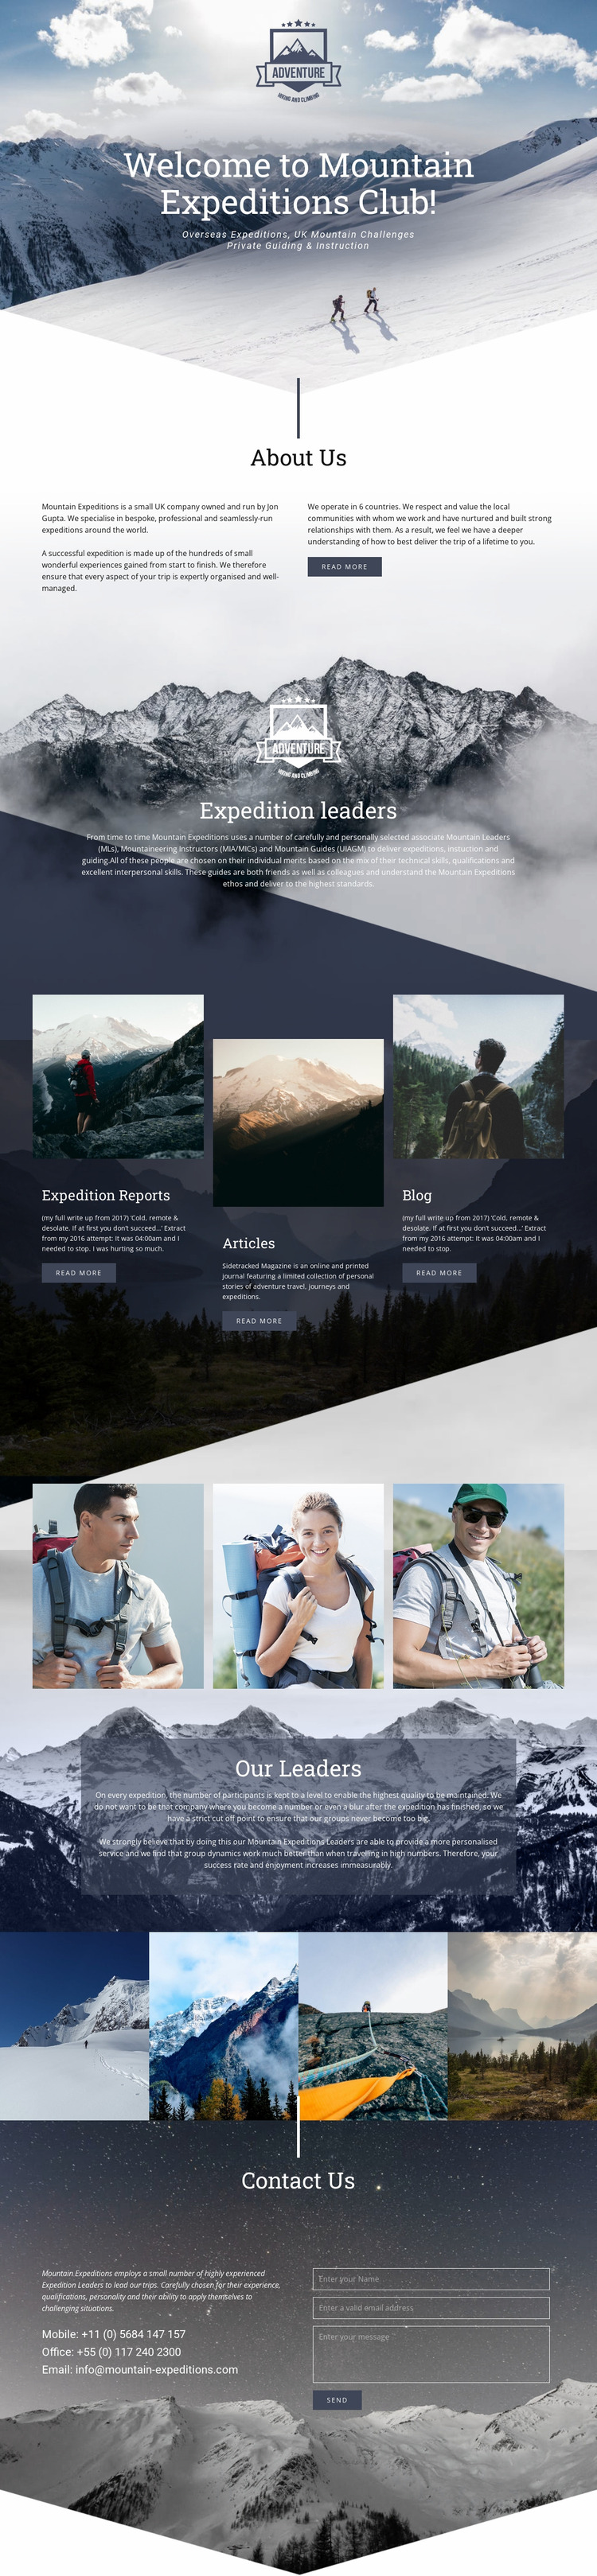 Extreme mountain expedition Website Mockup